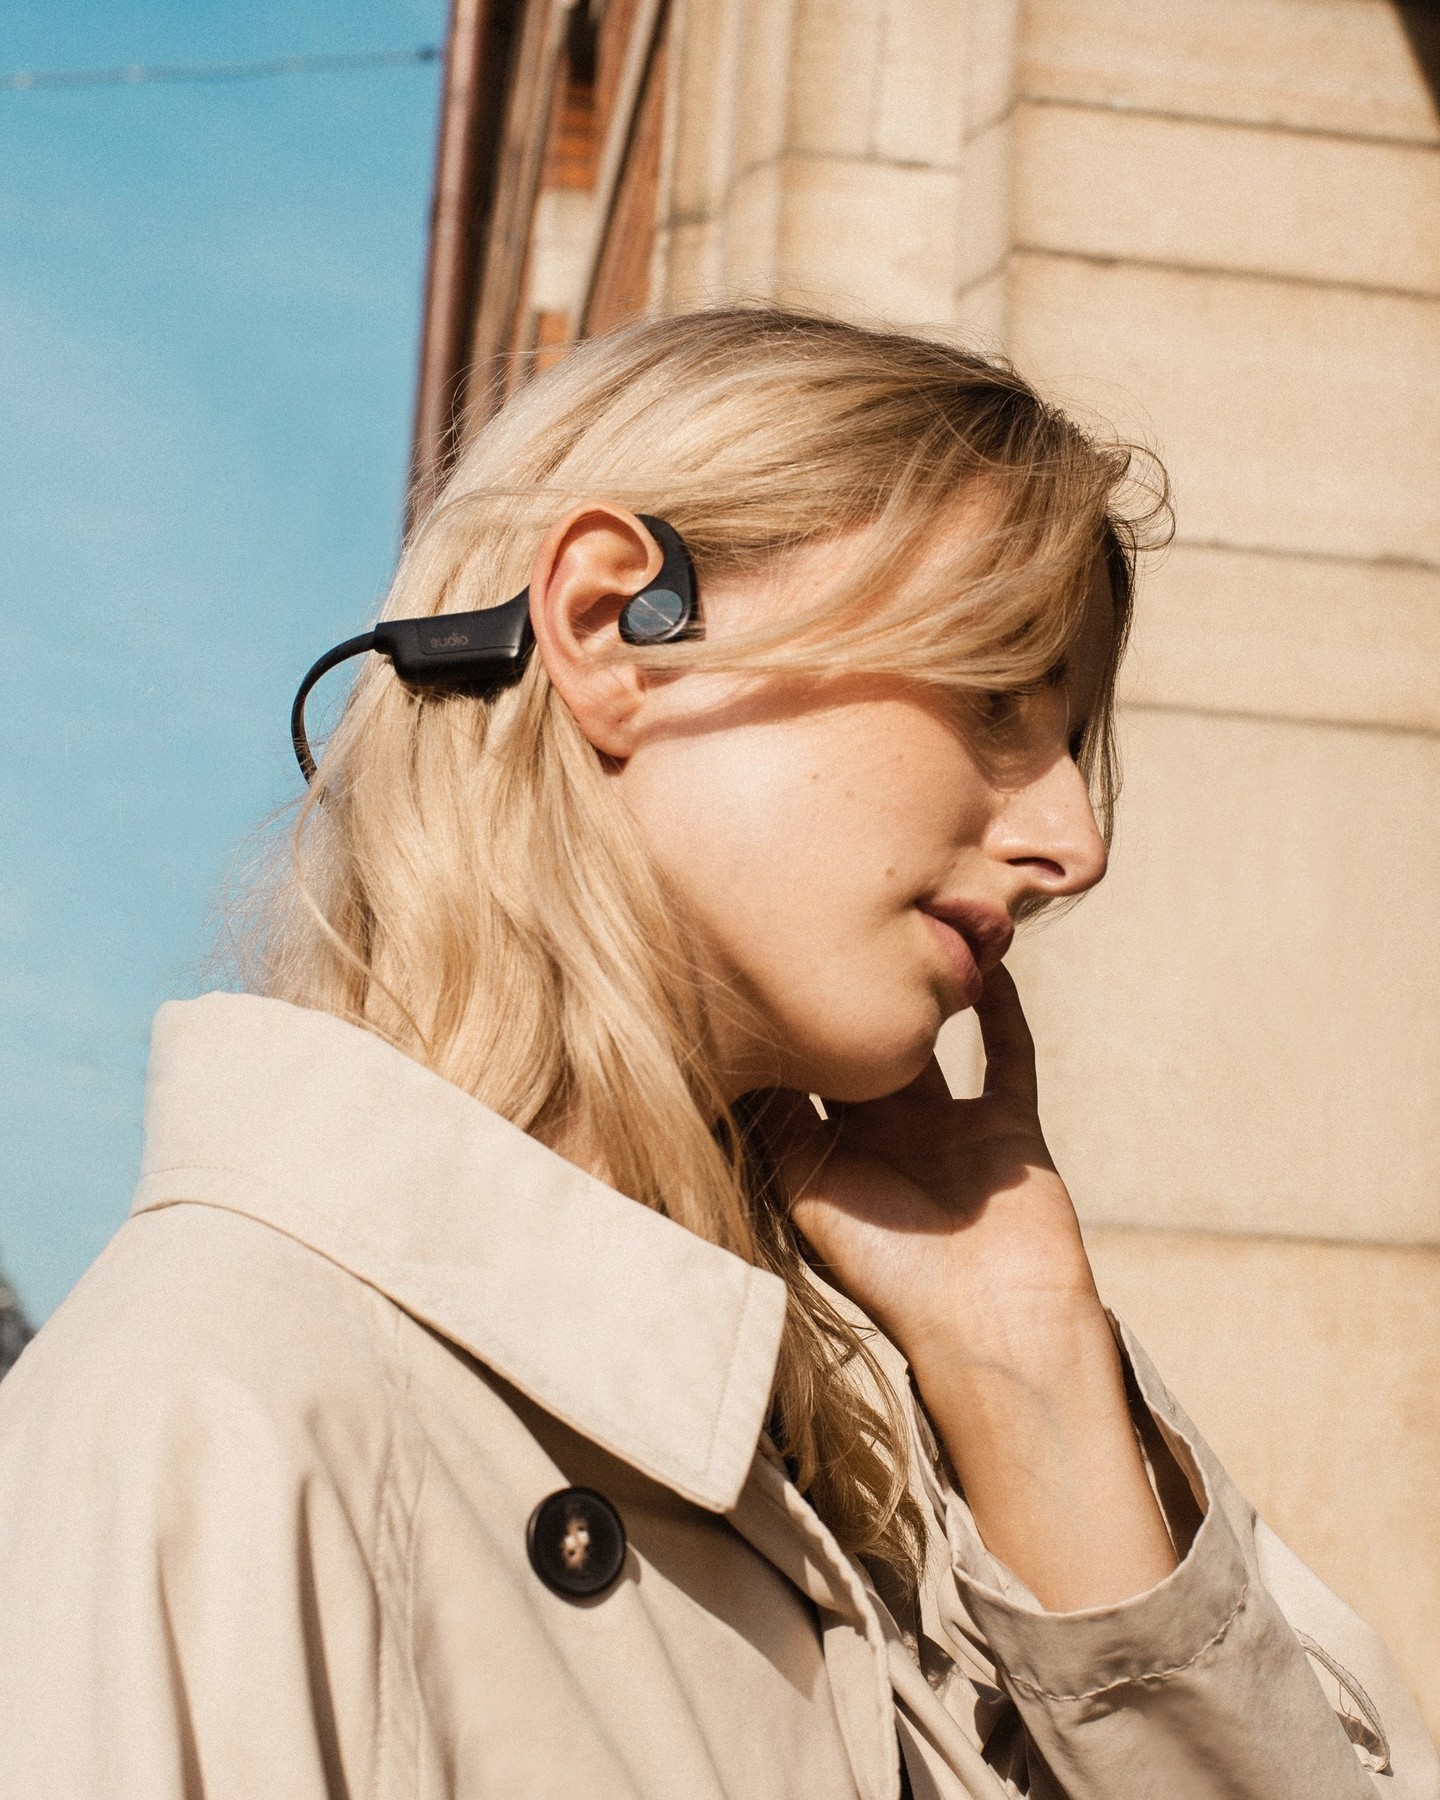 The Flex Fit Bone Conduction Headphones. Lightweight, easy to find in your bag, and up to 9hrs of playtime. Available now at sudio.com.⁠
⁠
#sudio #shapingsound #springishere #B2Black #B2White